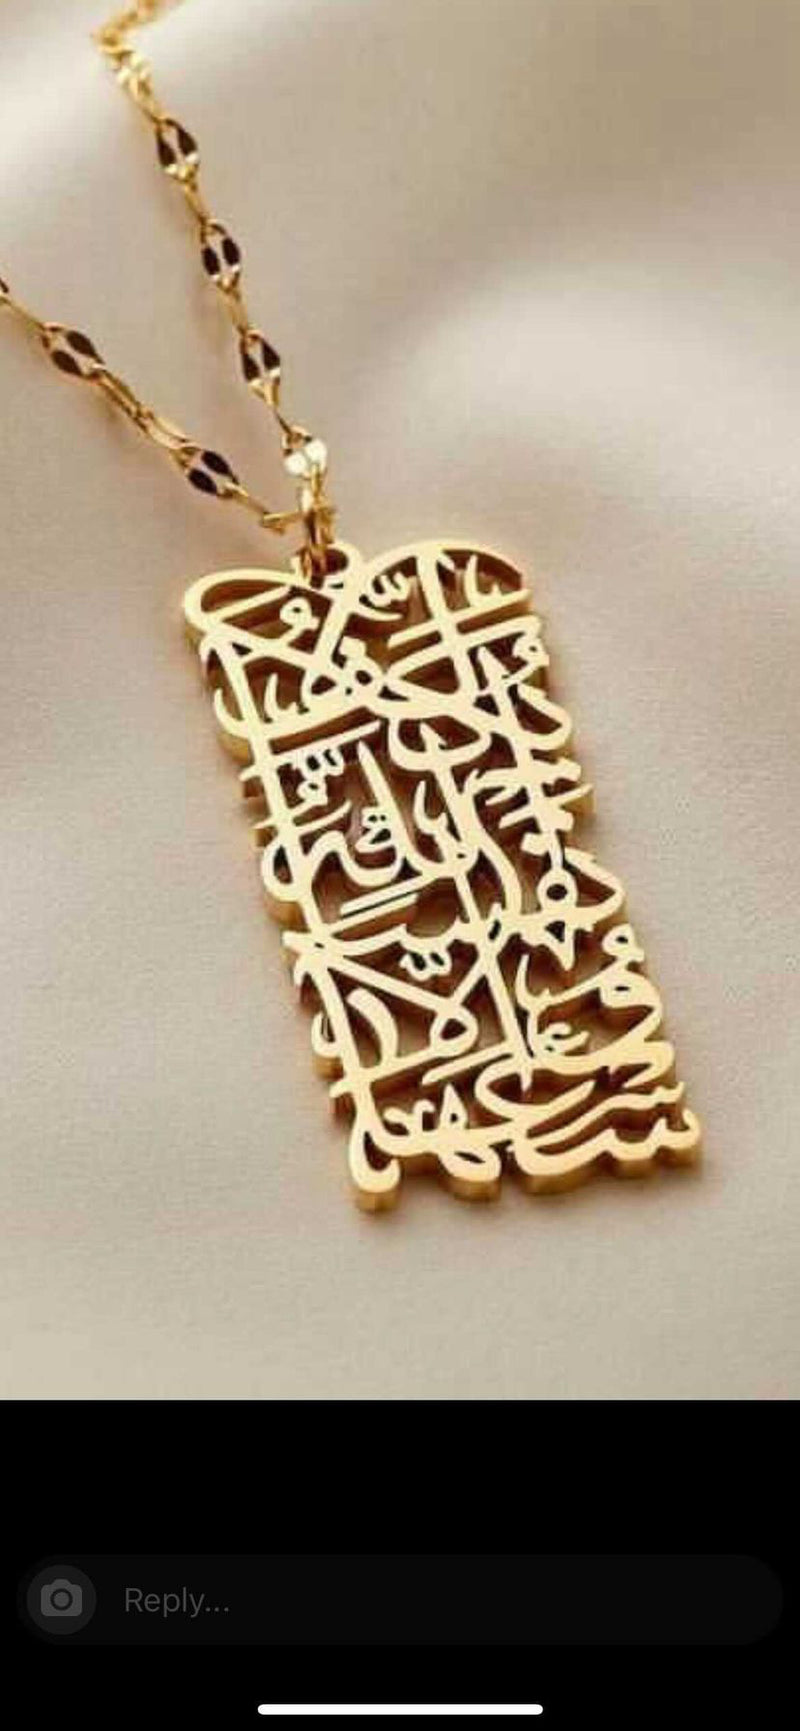 Custom Arabic calligraphy pendant “verily with hardship comes ease”